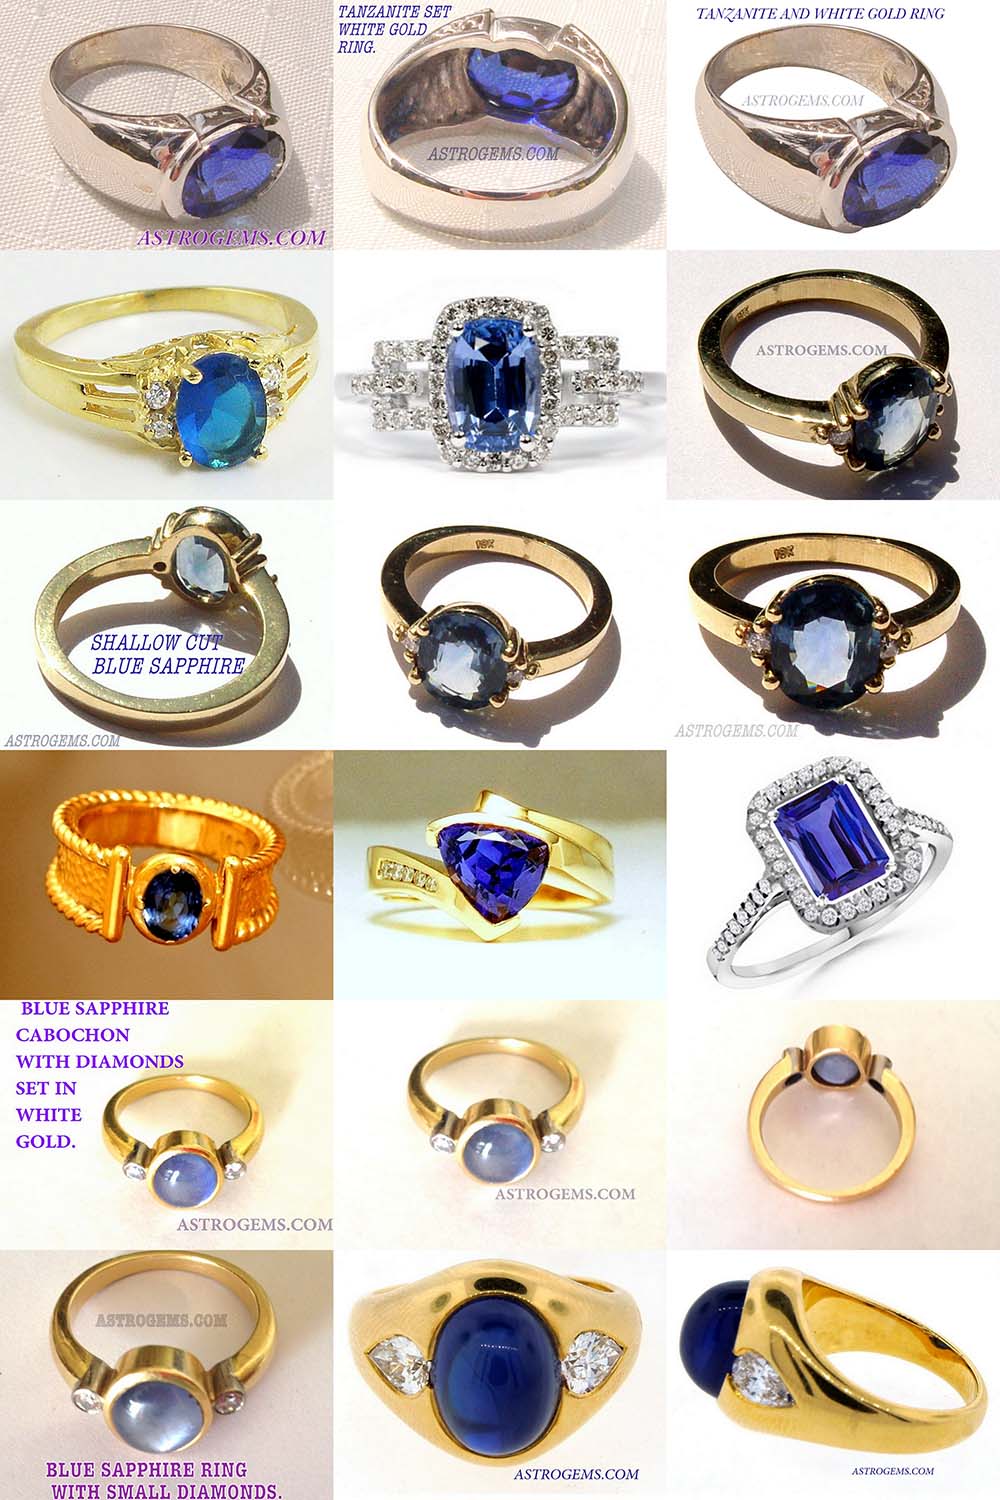 Astrogems makes a large range of astrological blue sapphire rings.